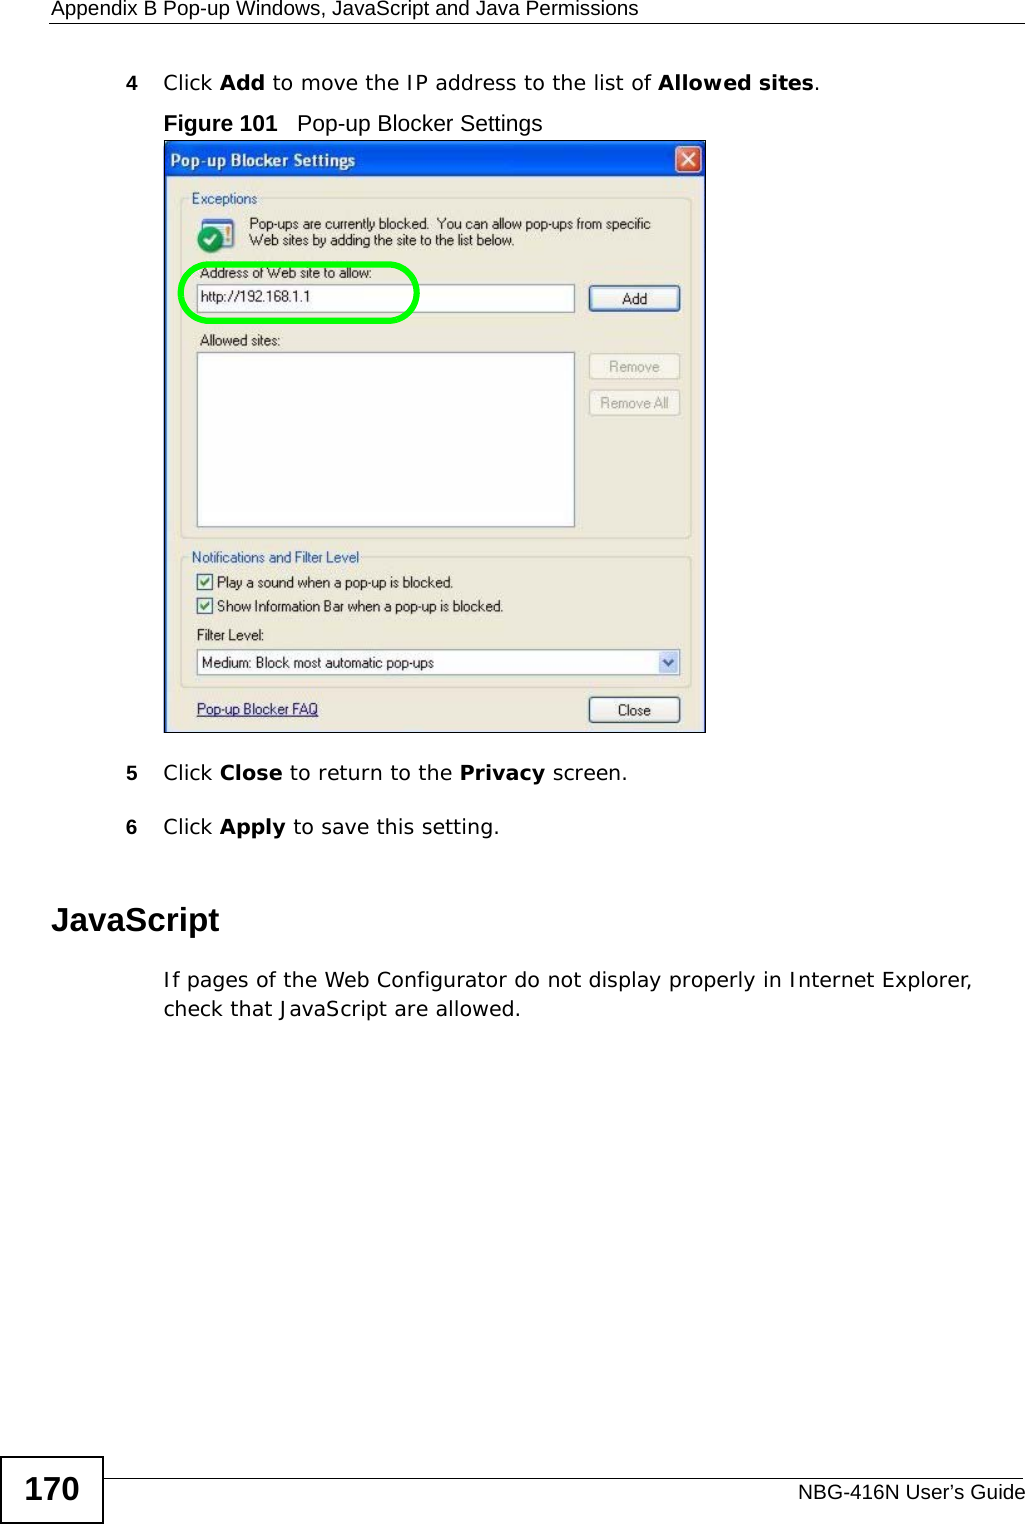 Appendix B Pop-up Windows, JavaScript and Java PermissionsNBG-416N User’s Guide1704Click Add to move the IP address to the list of Allowed sites.Figure 101   Pop-up Blocker Settings5Click Close to return to the Privacy screen. 6Click Apply to save this setting. JavaScriptIf pages of the Web Configurator do not display properly in Internet Explorer, check that JavaScript are allowed. 